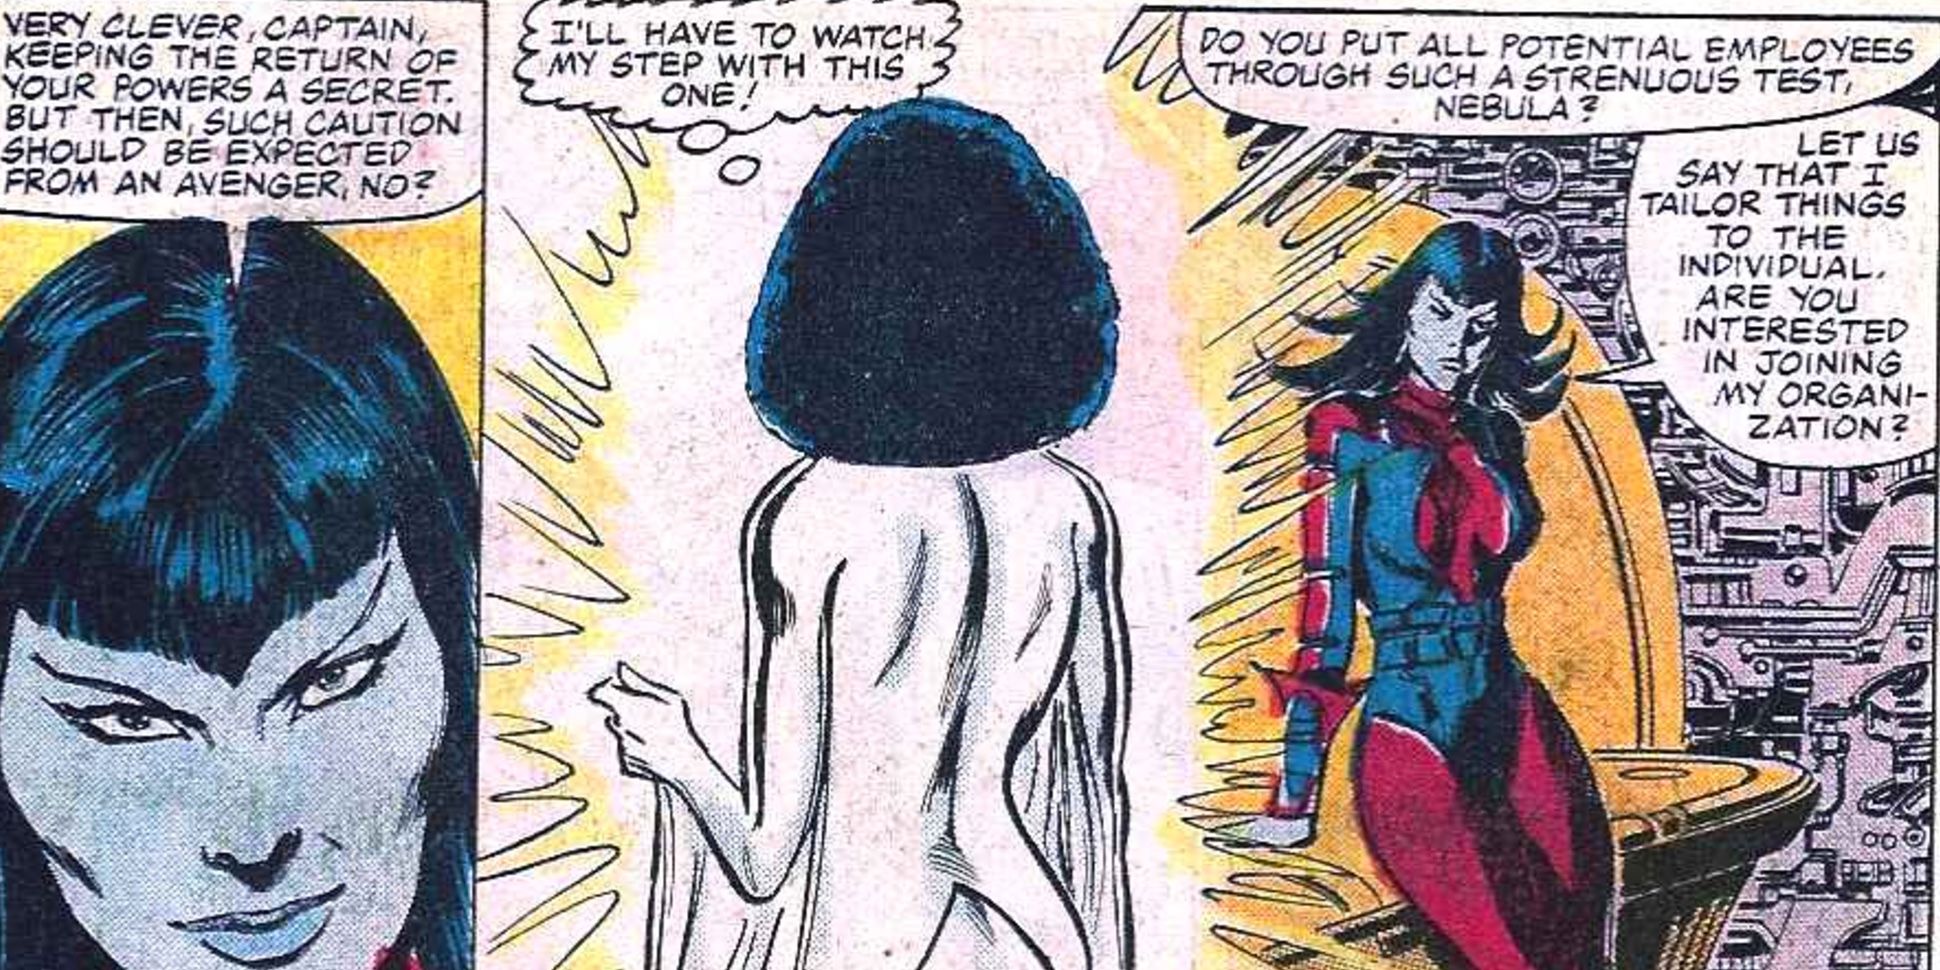 Nebula first appears in Avengers 257 with Monica Rambeau